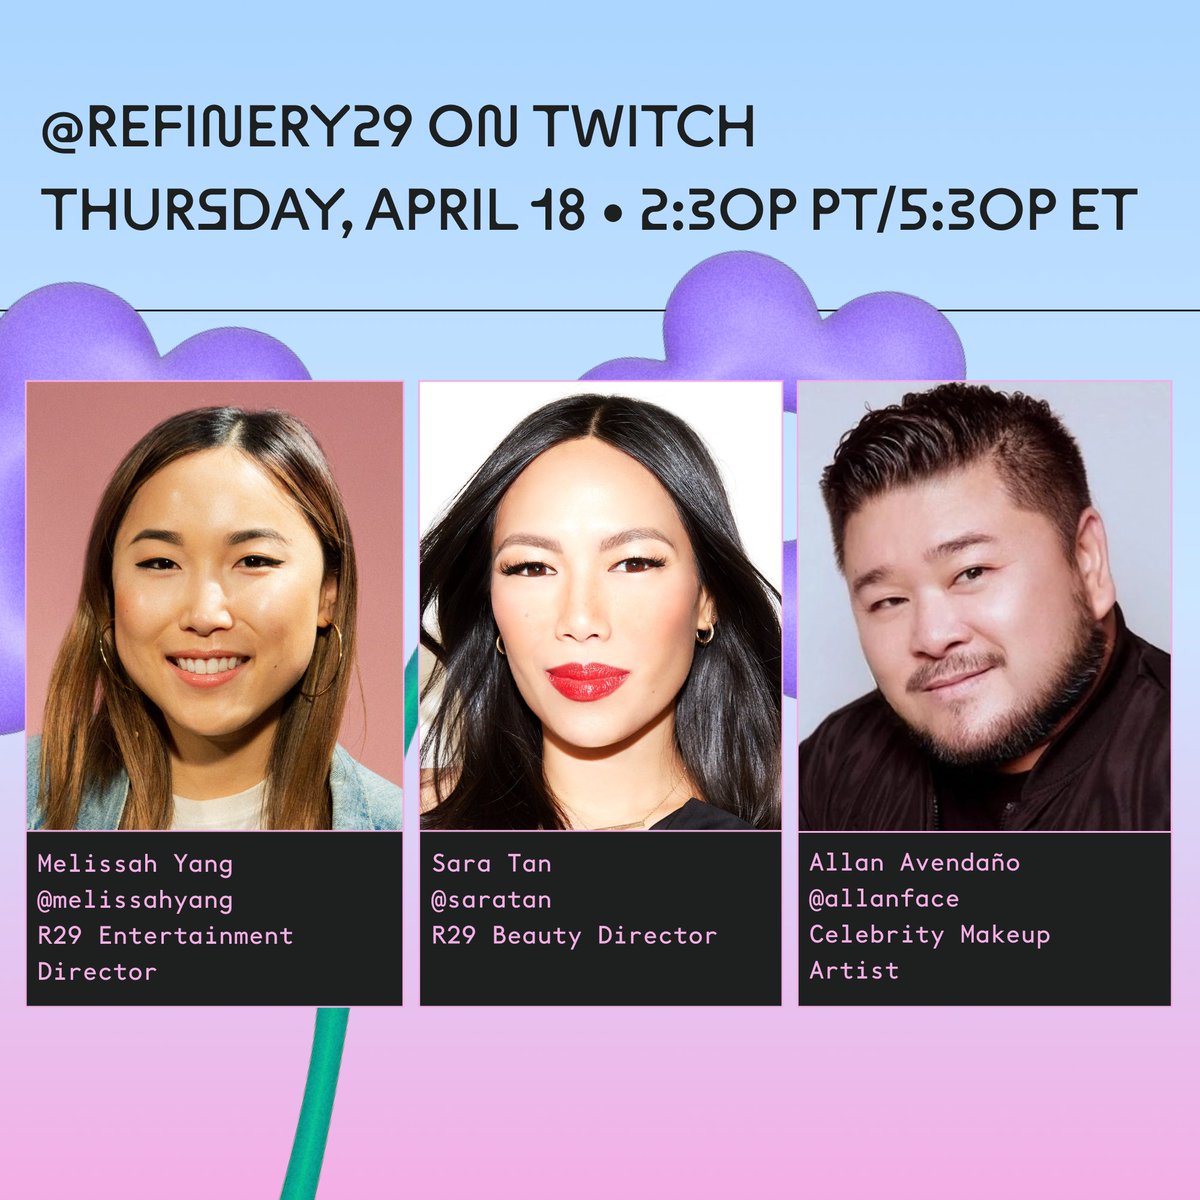 Live on #R29Twitch tomorrow... Join us at 2:30pm PT/5:30pm ET! on April 18 with guest streamer @allanface. ✨ Watch here: trib.al/h2Q8Y0v